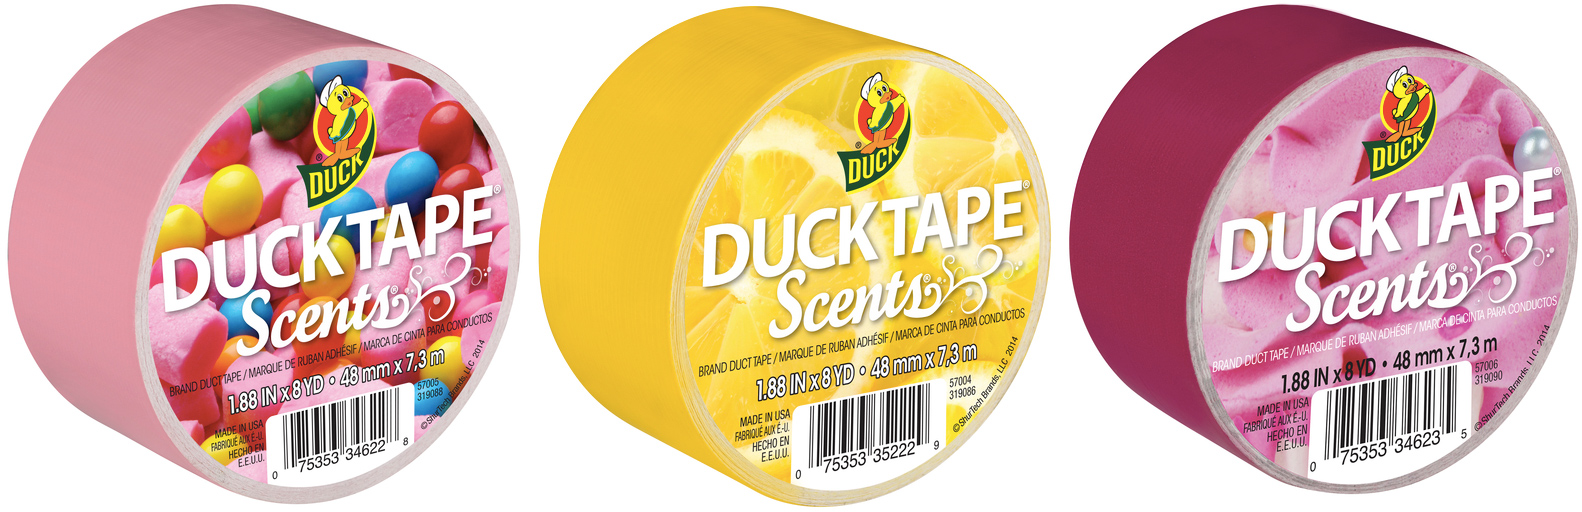 Scented Duct Tape For Half-Arsed Repairs That At Least Smell Good